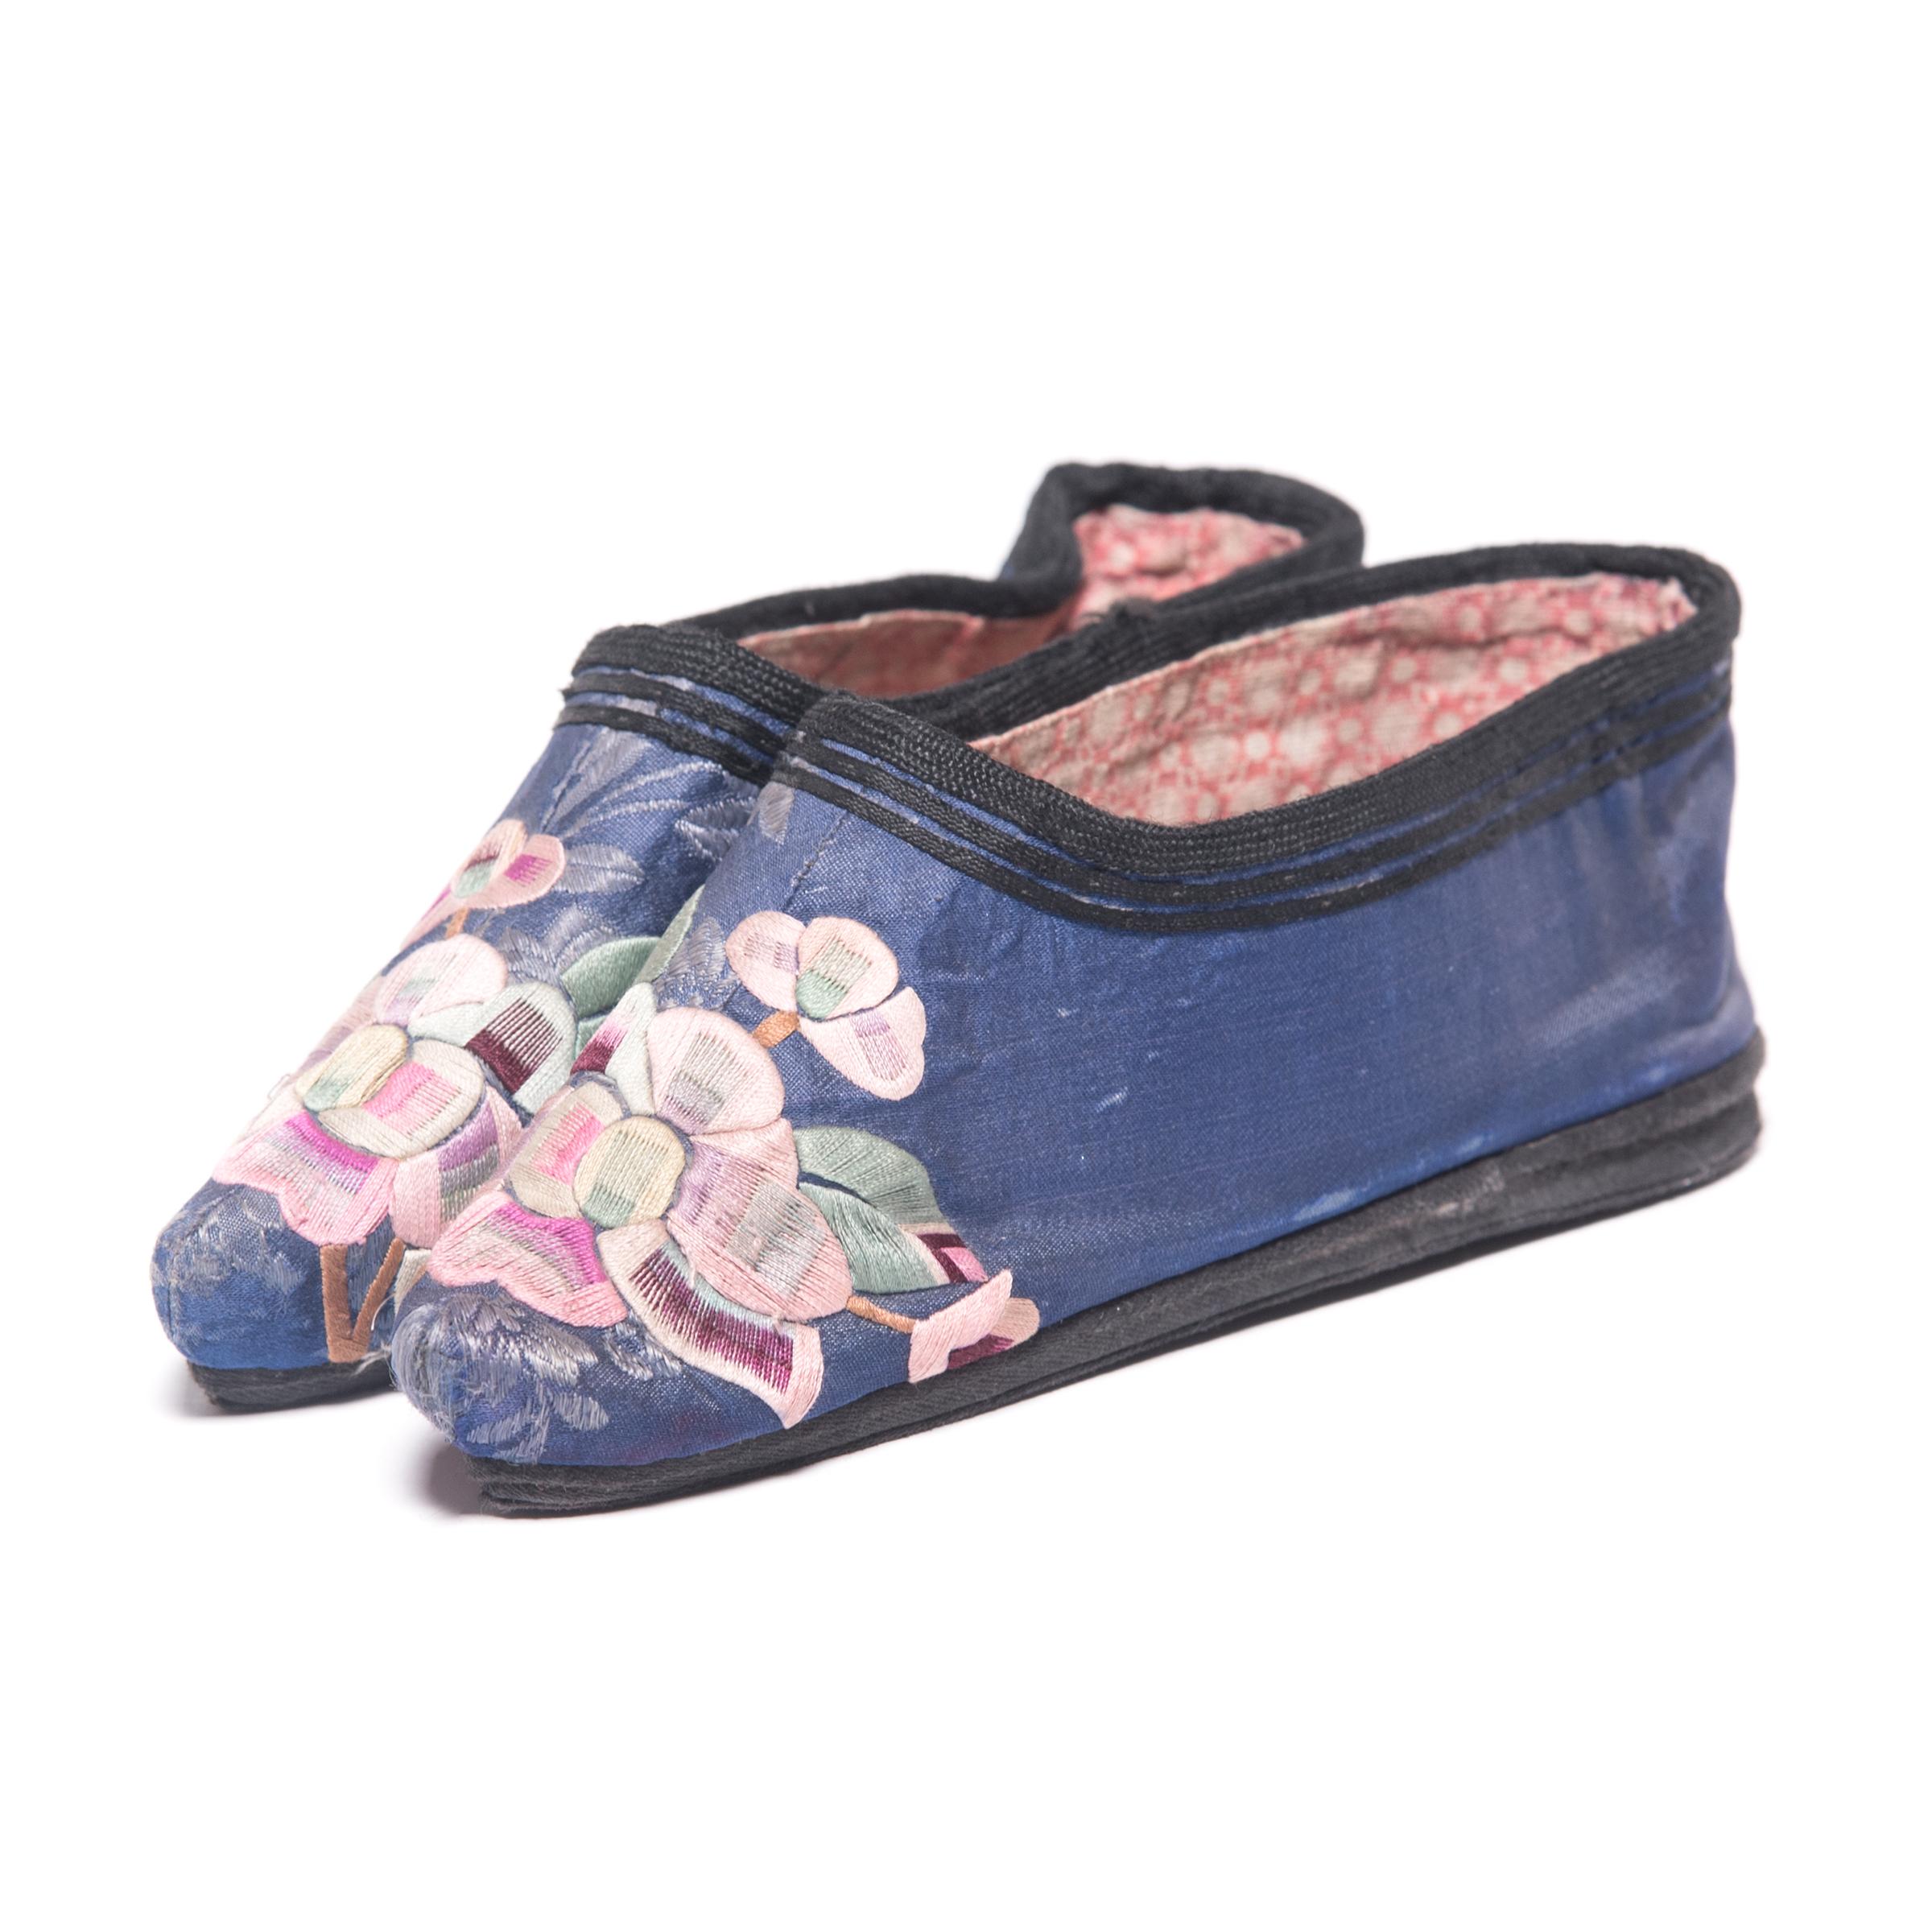 These pointed silk slippers, beautifully embroidered with pink plum blossoms, were shaped to resemble a lotus bud and enhanced the diminutive shape of bound feet. A practice that began in the Tang dynasty and reached the height of its popularity